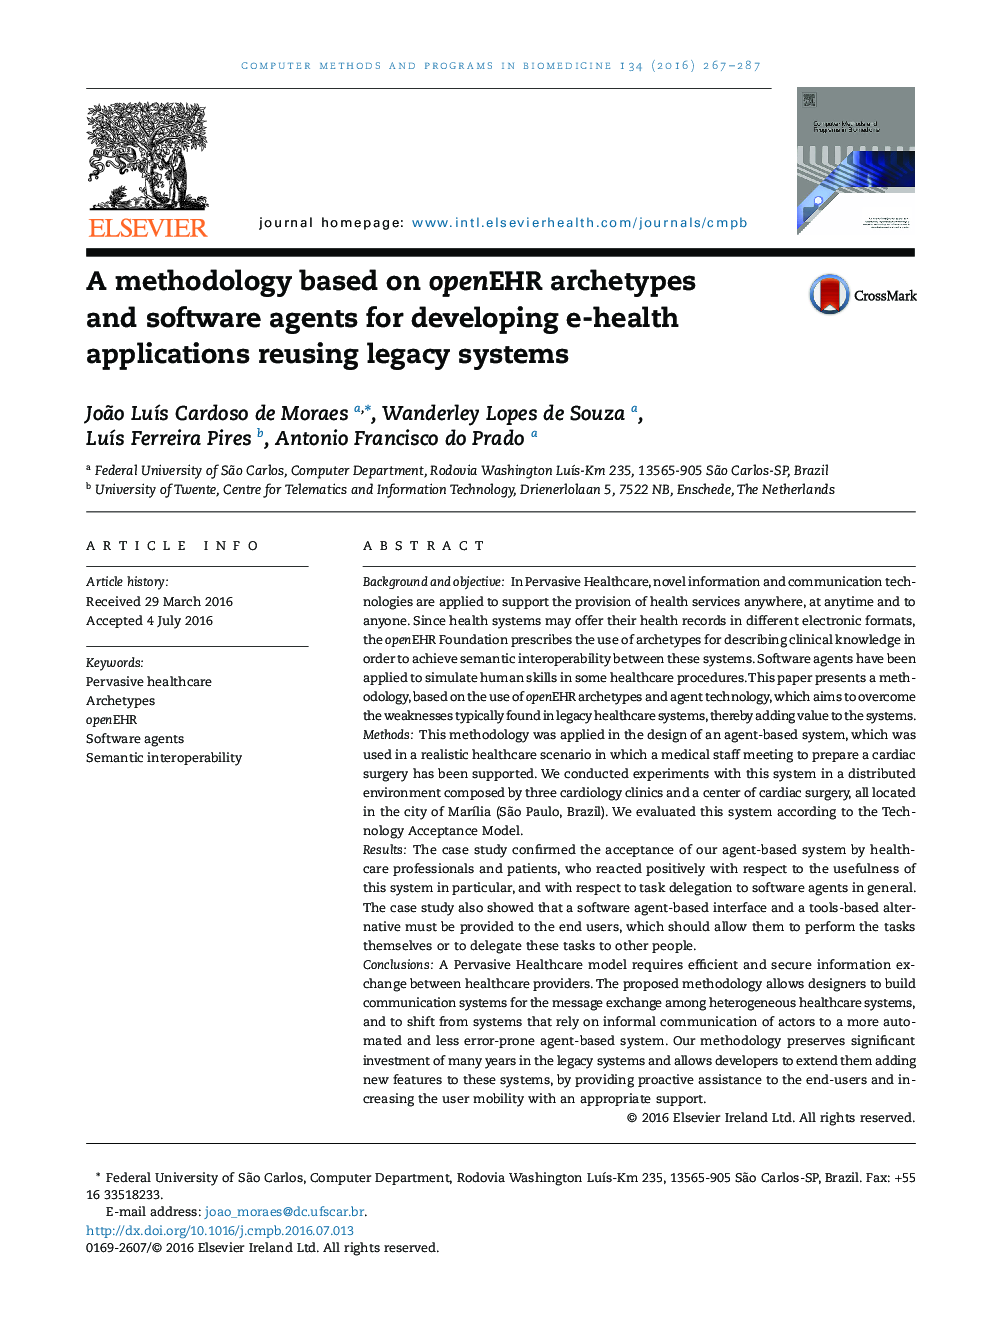 A methodology based on openEHR archetypes and software agents for developing e-health applications reusing legacy systems